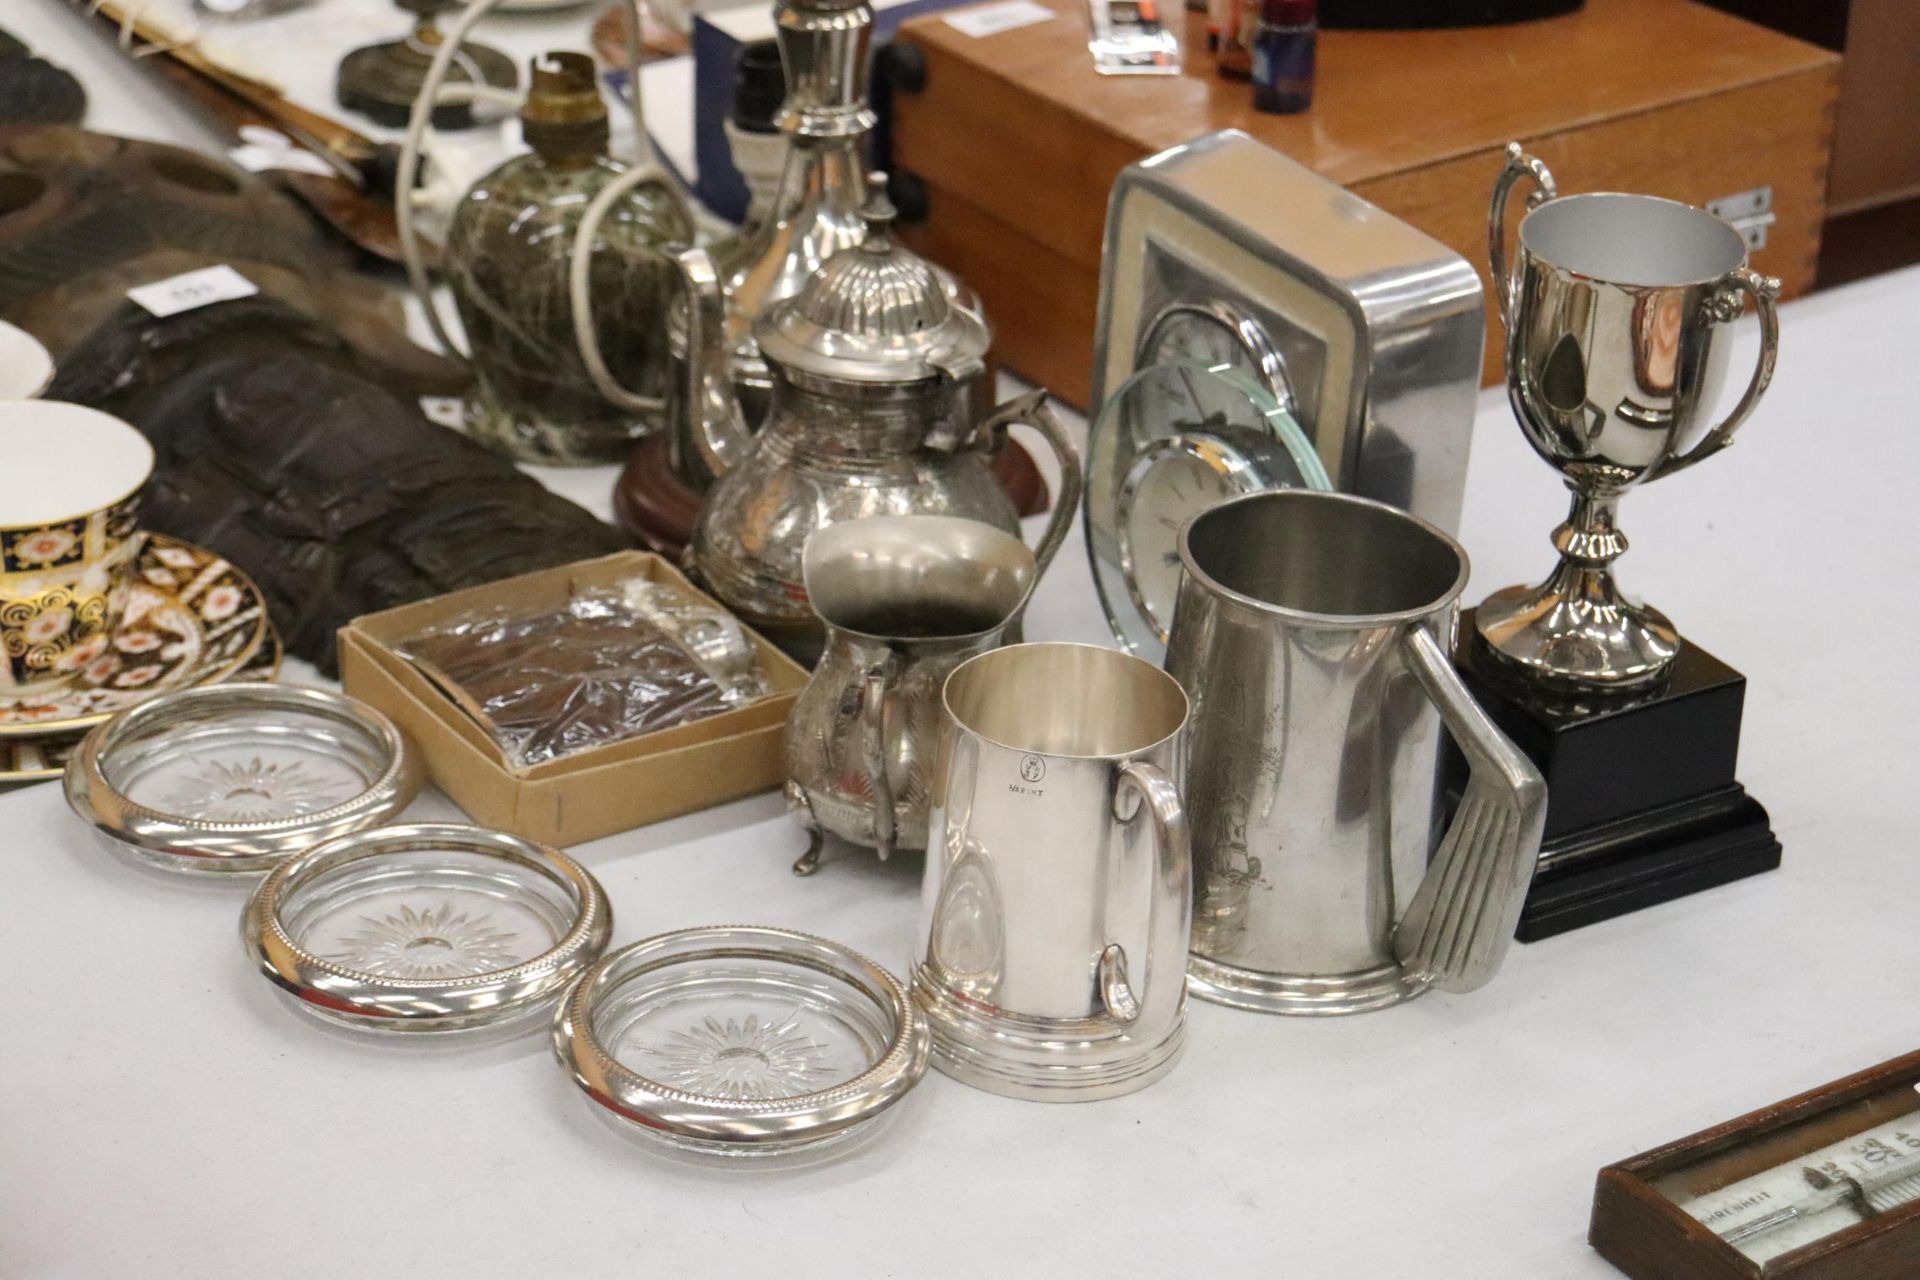 A QUANTITY OF SILVER PLATED ITEMS TO INCLUDE A TEAPOT, TANKARDS, A TROPHY, HIP FLASK, CLOCKS, ETC - Image 3 of 12